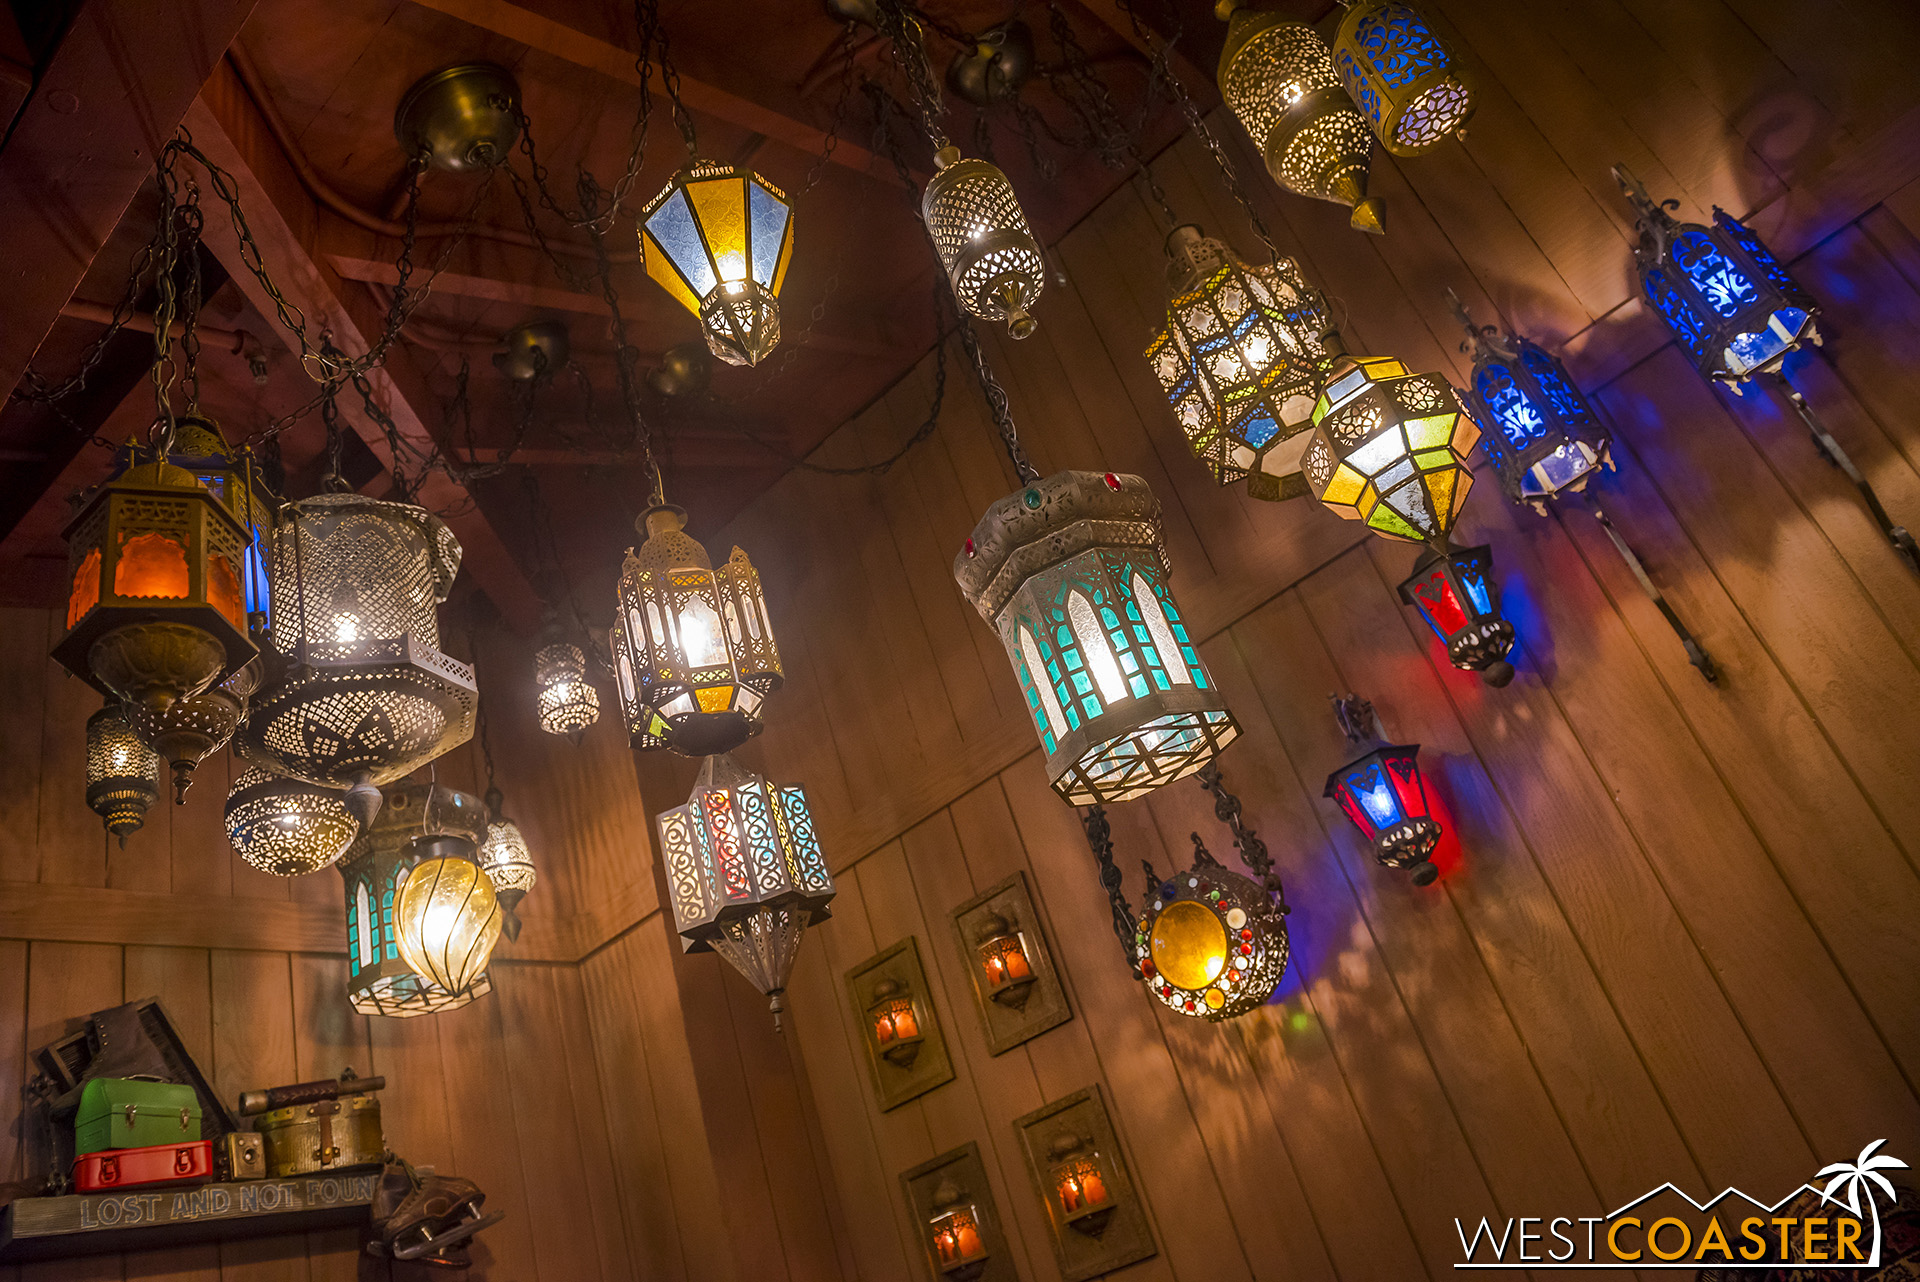  If these look familiar, they were reclaimed from the area’s former use in Aladdin’s Oasis. 